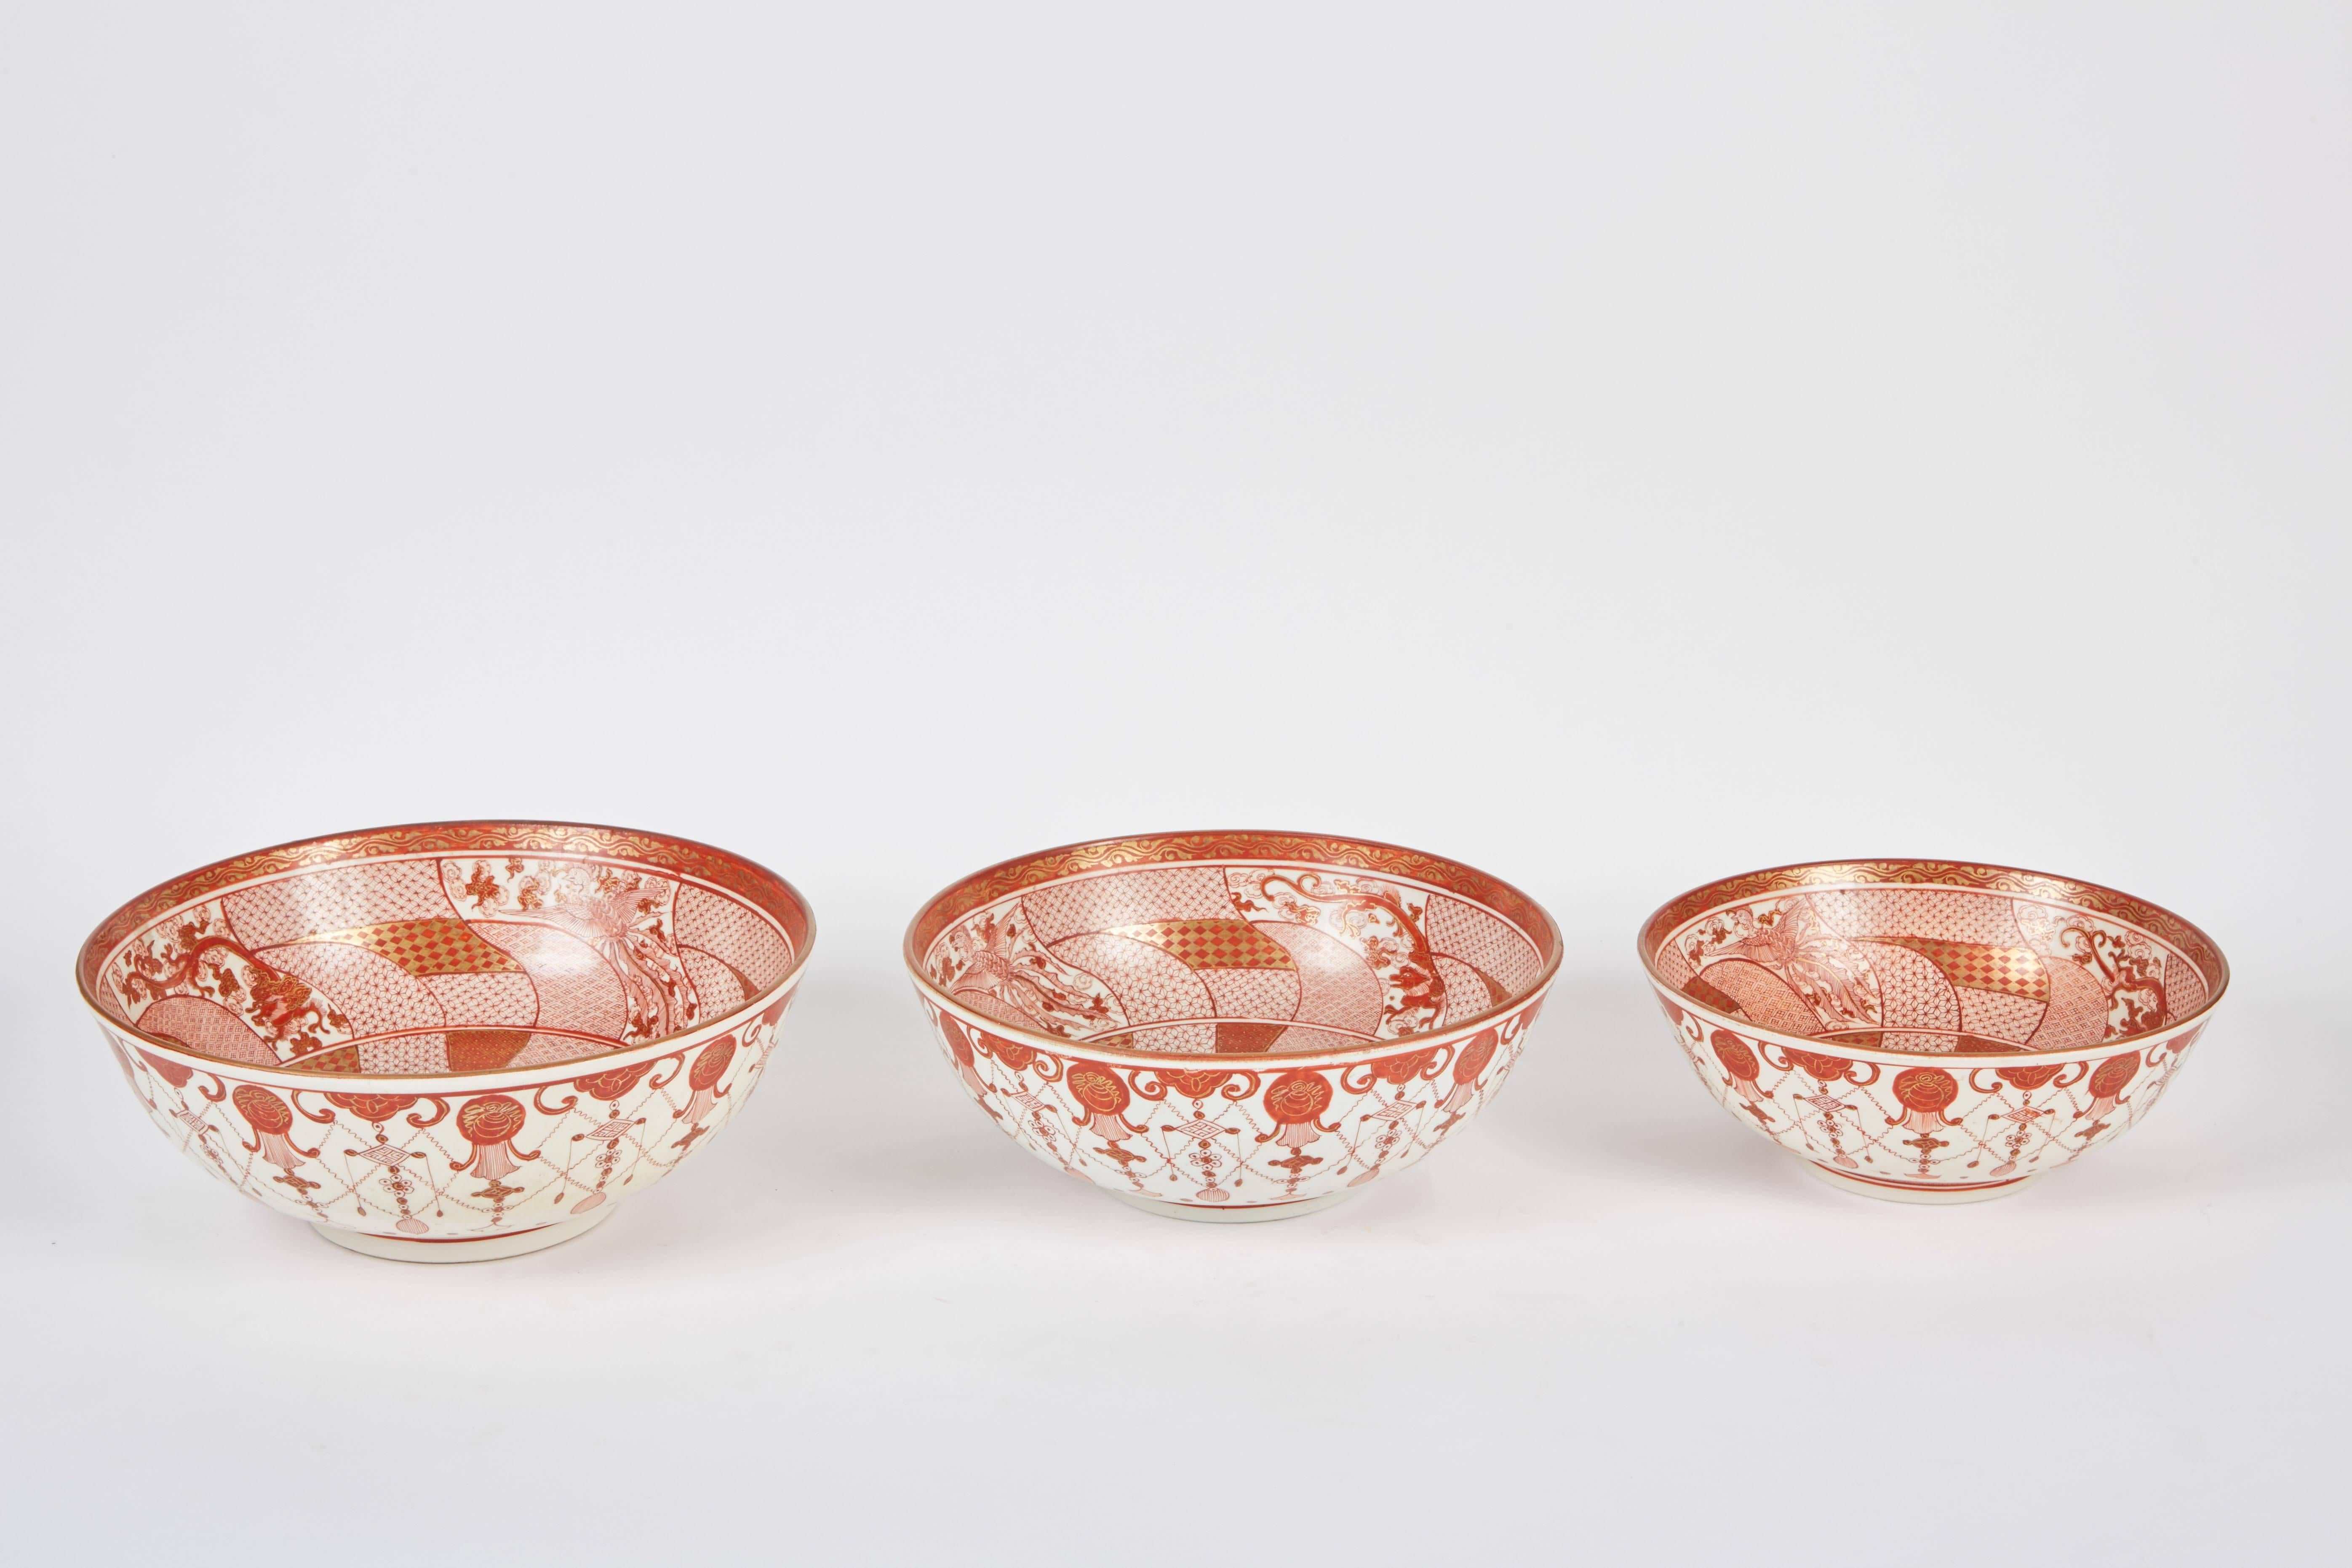 A set of three Kutani Japanese bowls in the Eiraku style, which is in contrast with the Yoshidaya style. The Eiraku style is a type of design technique where there is a gold coating on top of the original red color. Each one of these bowls has the